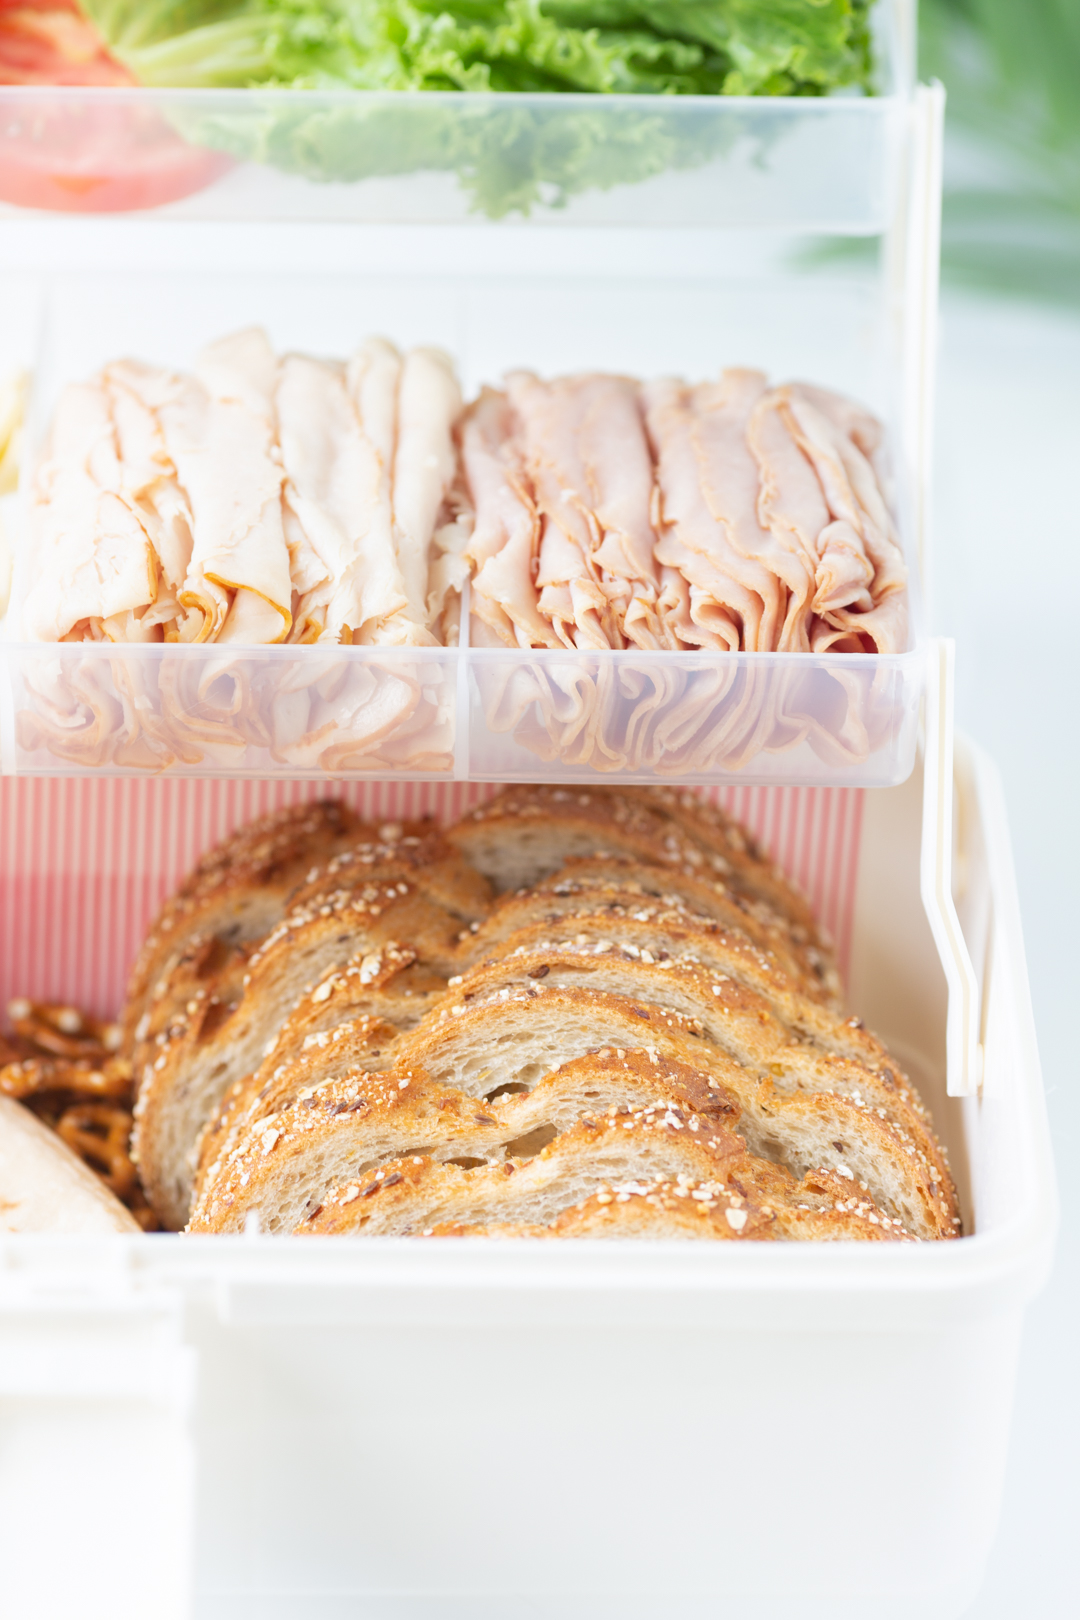 up close view of bread and lunch meat in a multi-tiered box